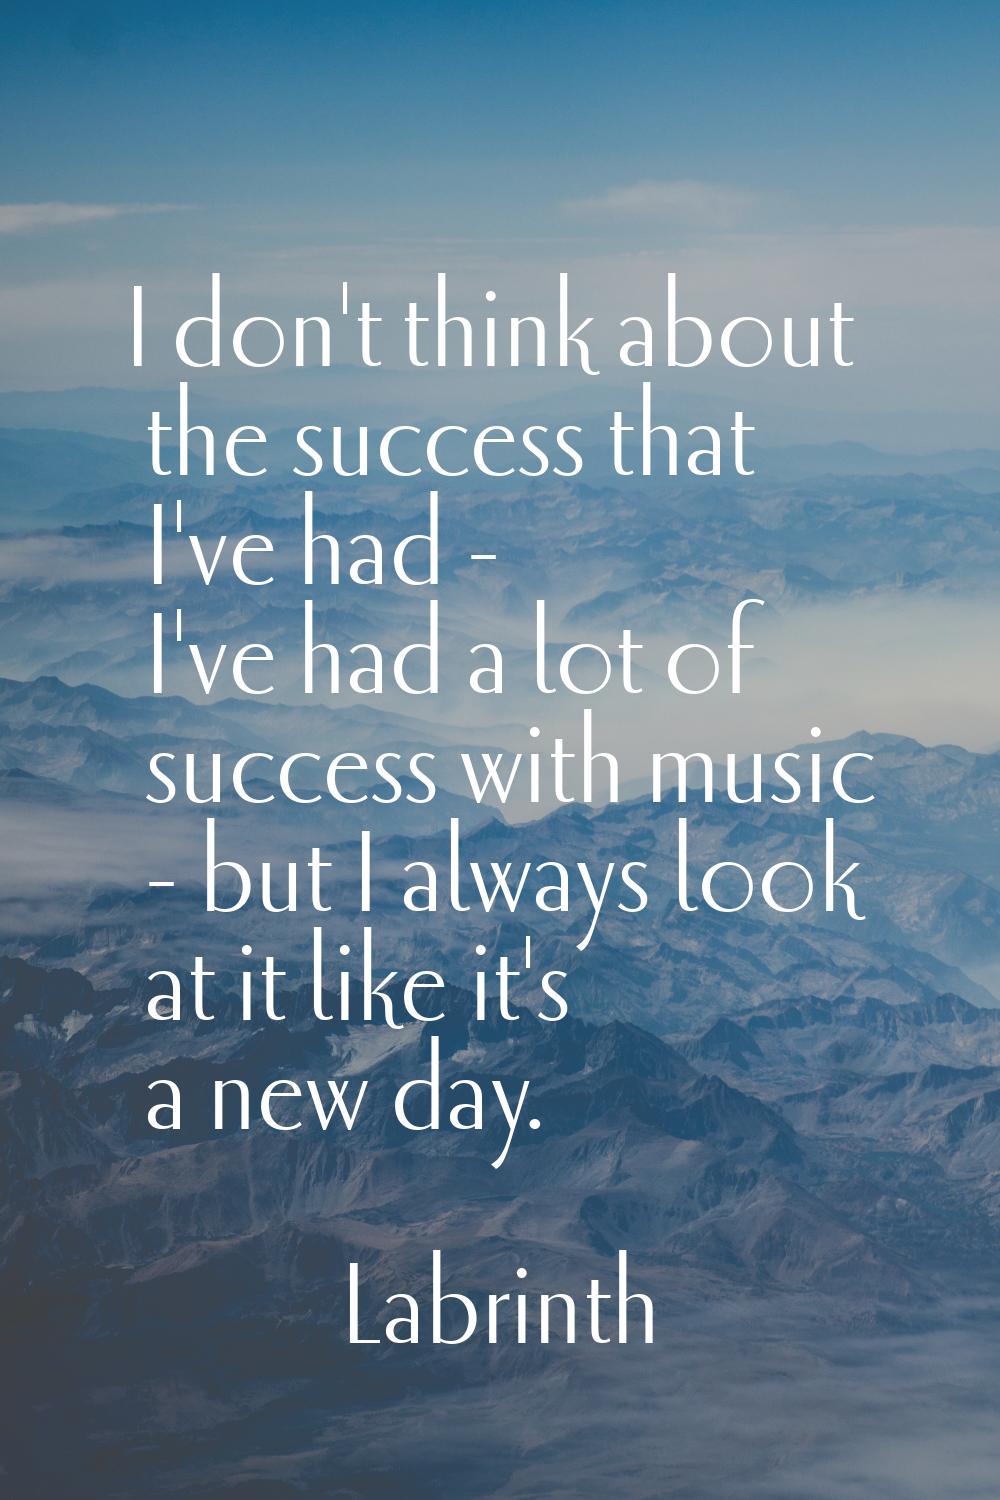 I don't think about the success that I've had - I've had a lot of success with music - but I always